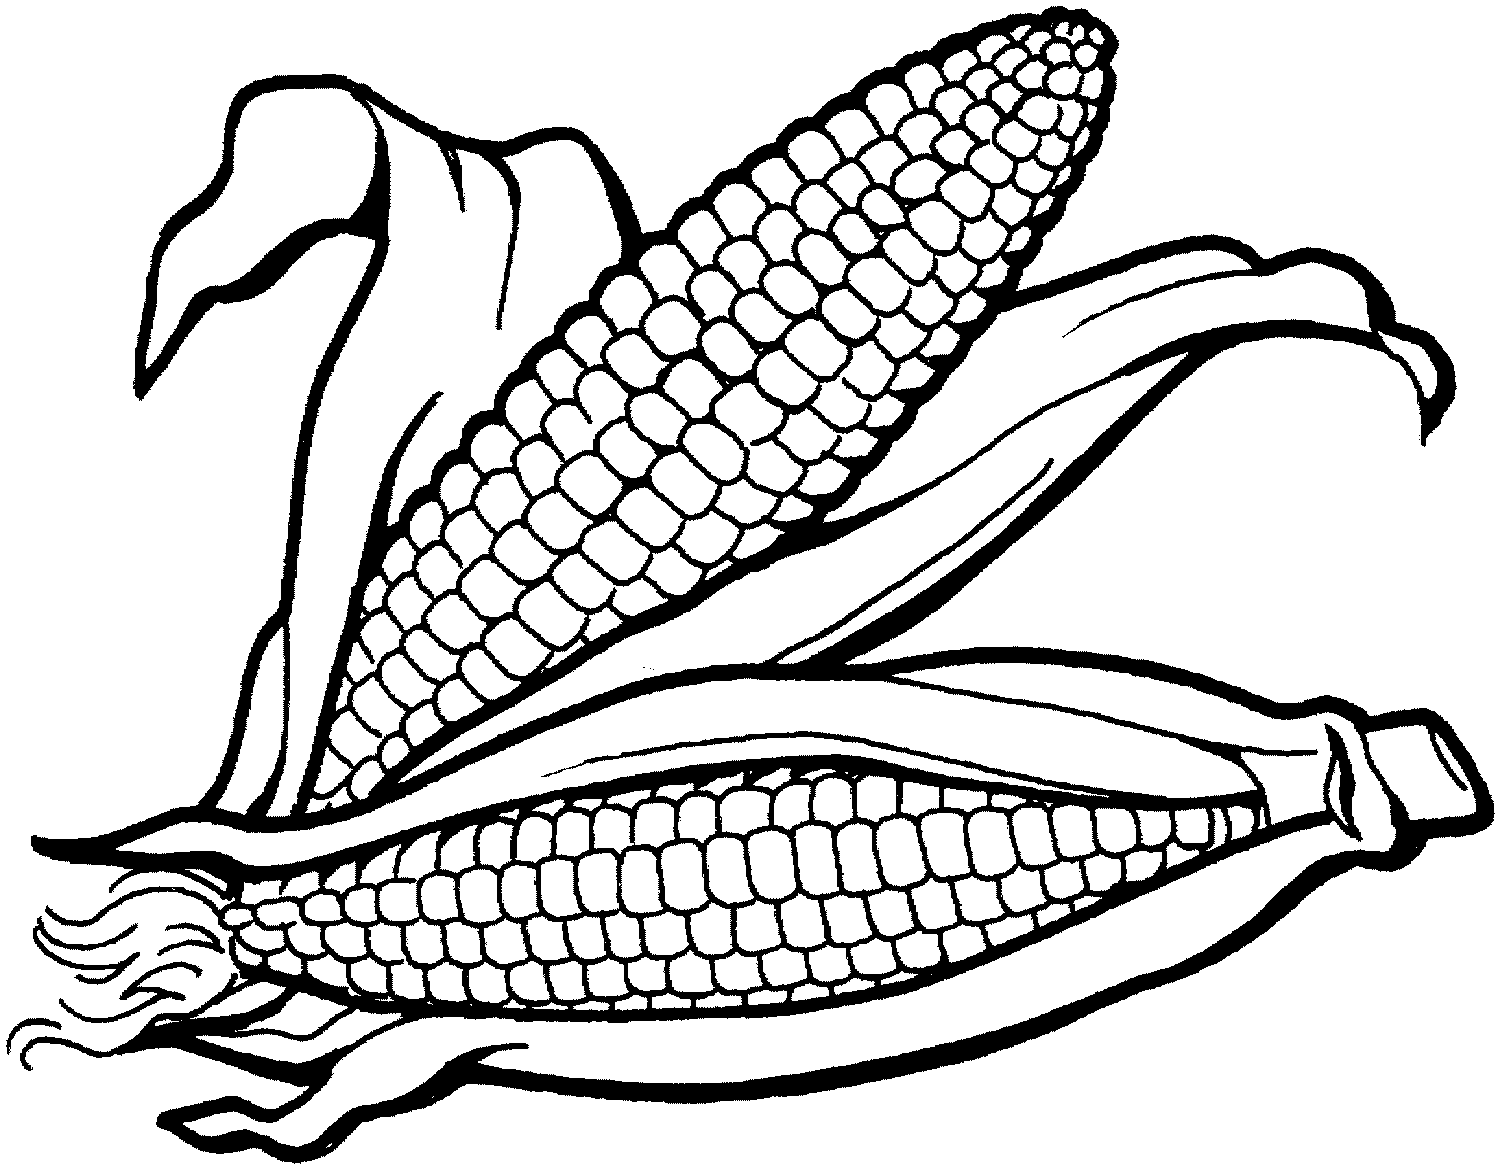 Corn Clipart Black And White | Clipart library - Free Clipart Images